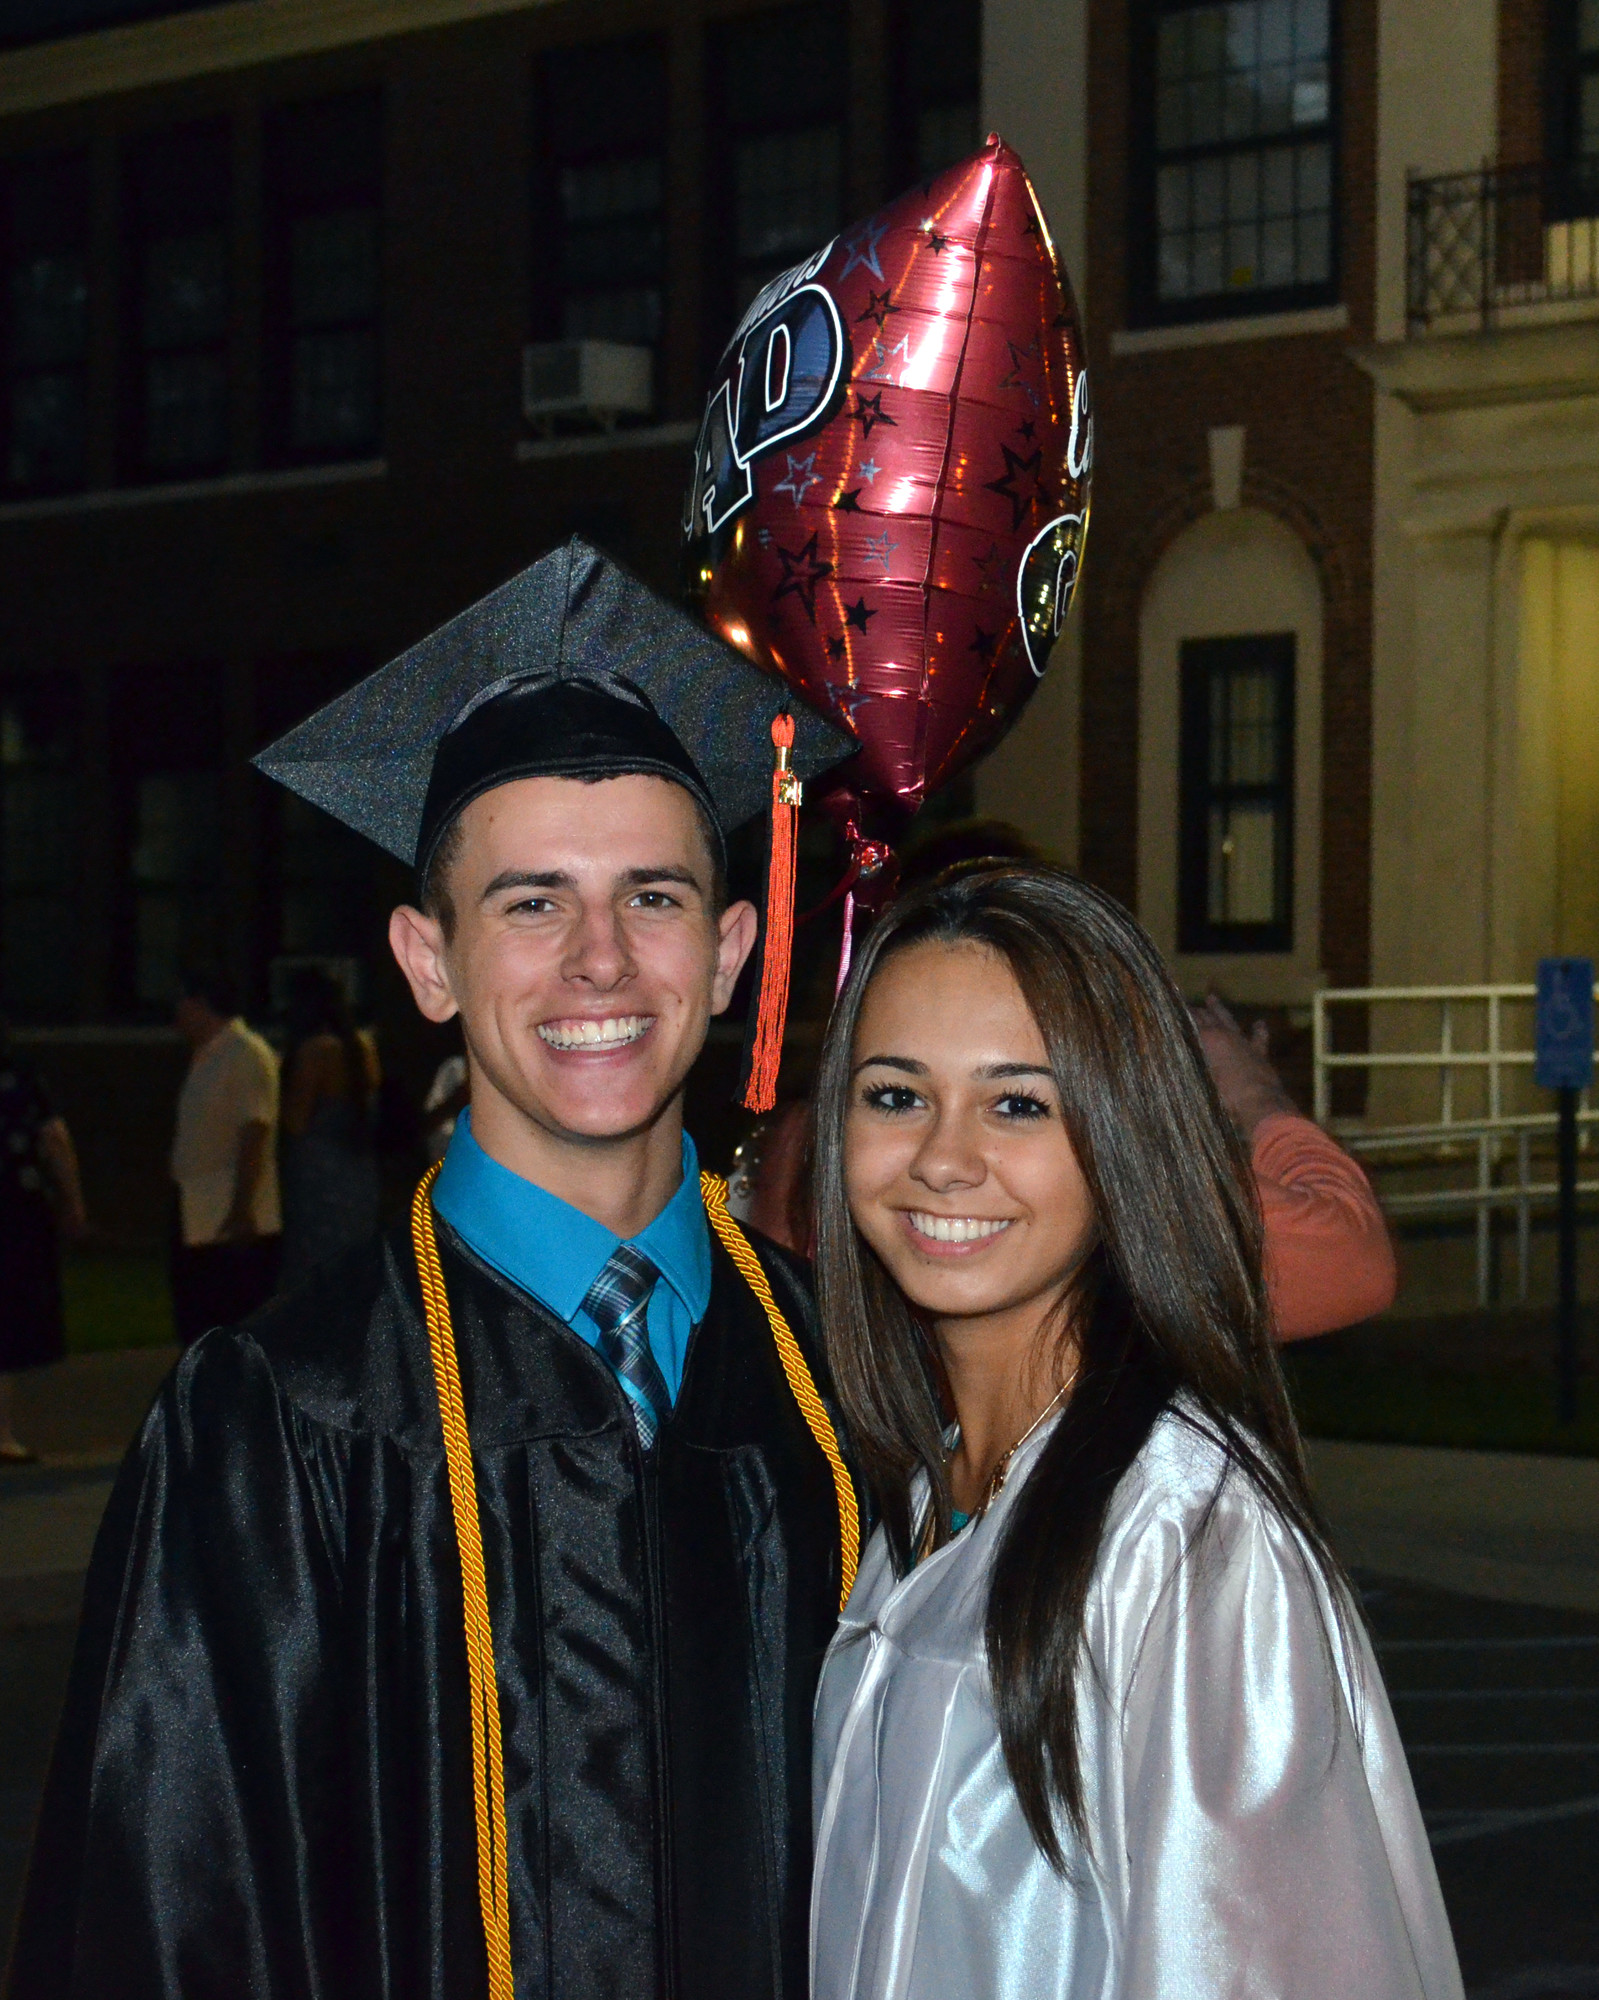 Class of 2014 students Garrett Caroff and Alexis Carlo greeted each other outside after the ceremony.